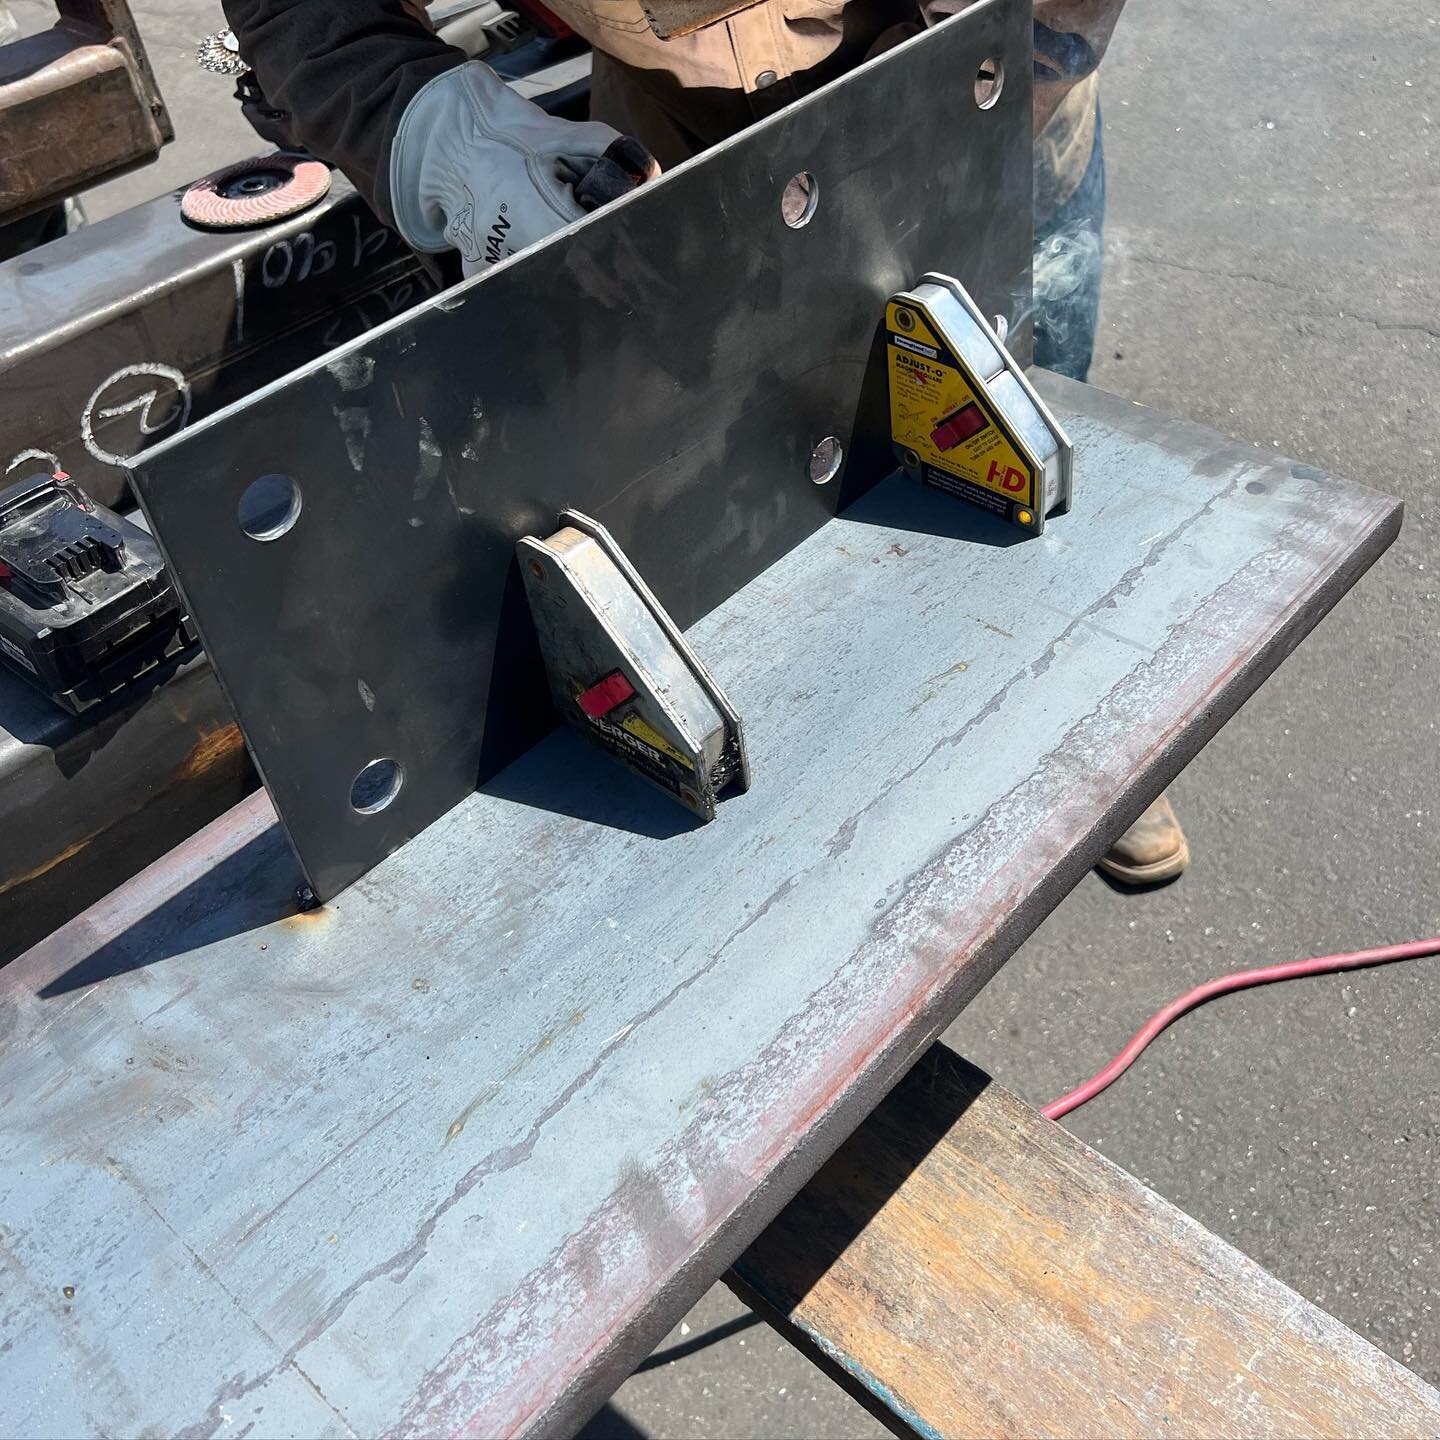 I love being able to work right off the truck and make things perfect even after other trades have had to rework areas. 
.
#ironarcfab #ironarcadvantage #structuralsteel #fieldfab #fabrication #steel #ironwork